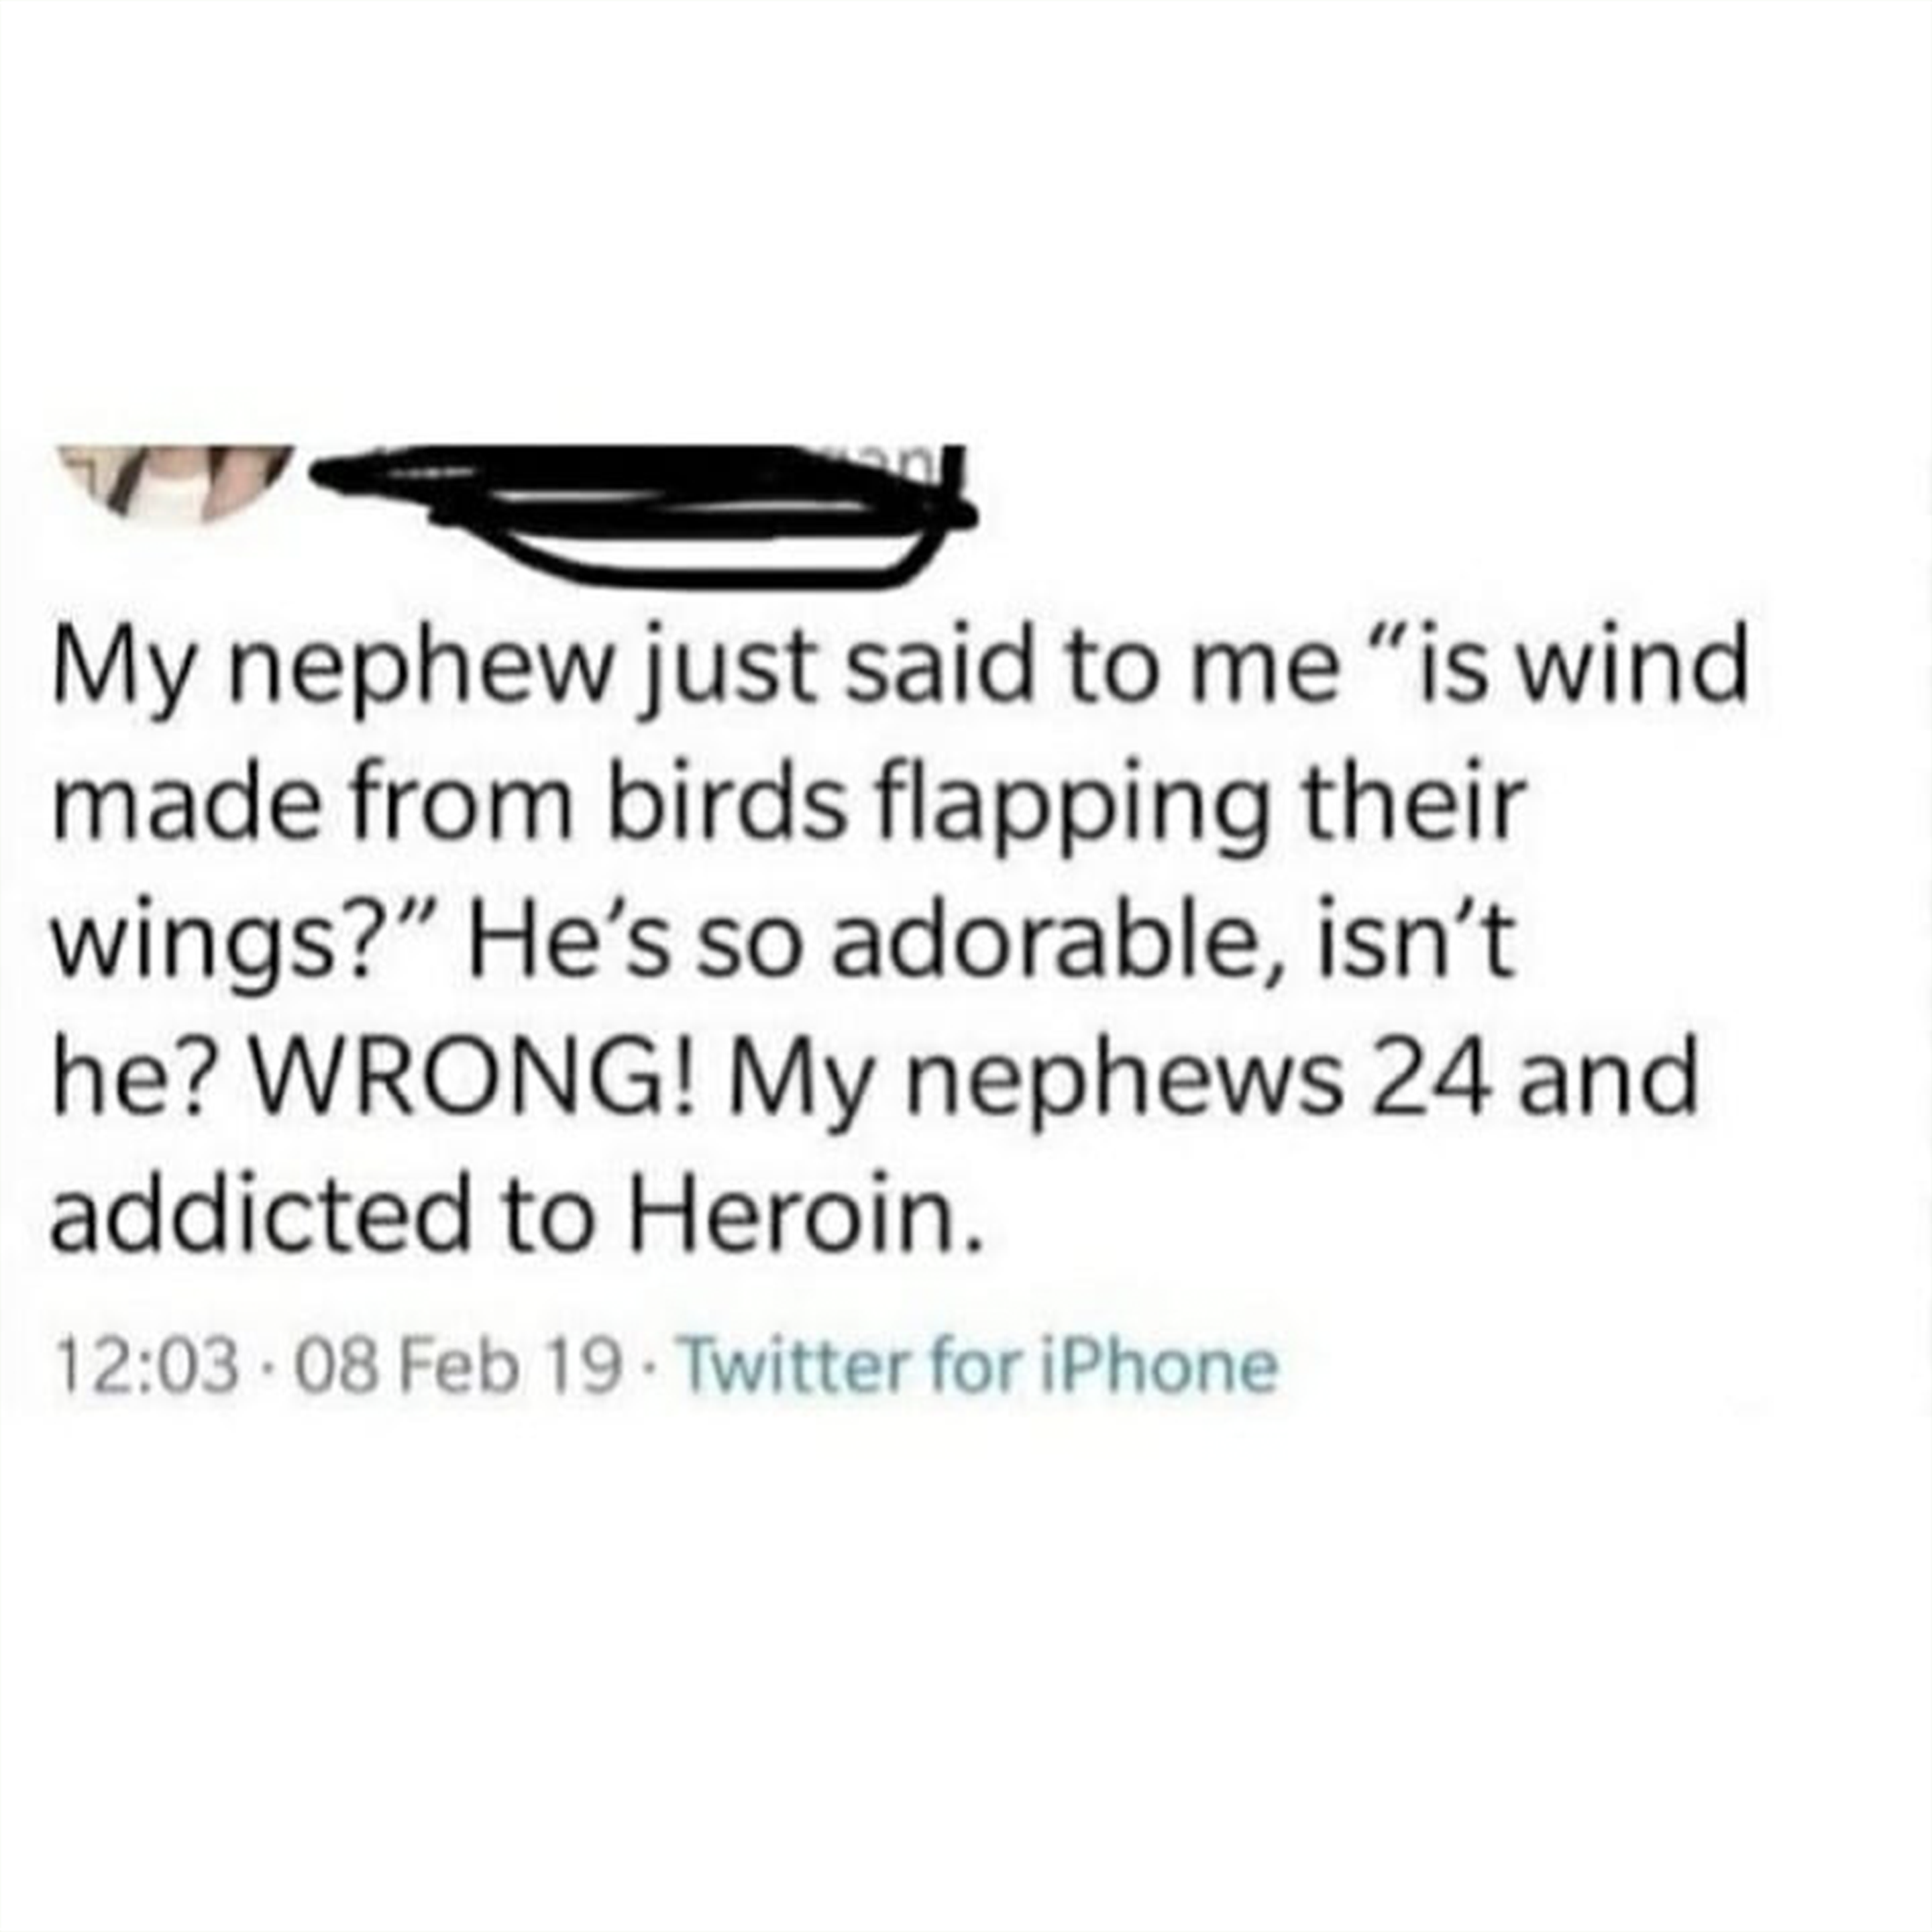 My nephew just said to me, "Is wind made from birds flapping their wings?" He's so adorable, isn't he? WRONG! My nephew's 24 and addicted to heroin.